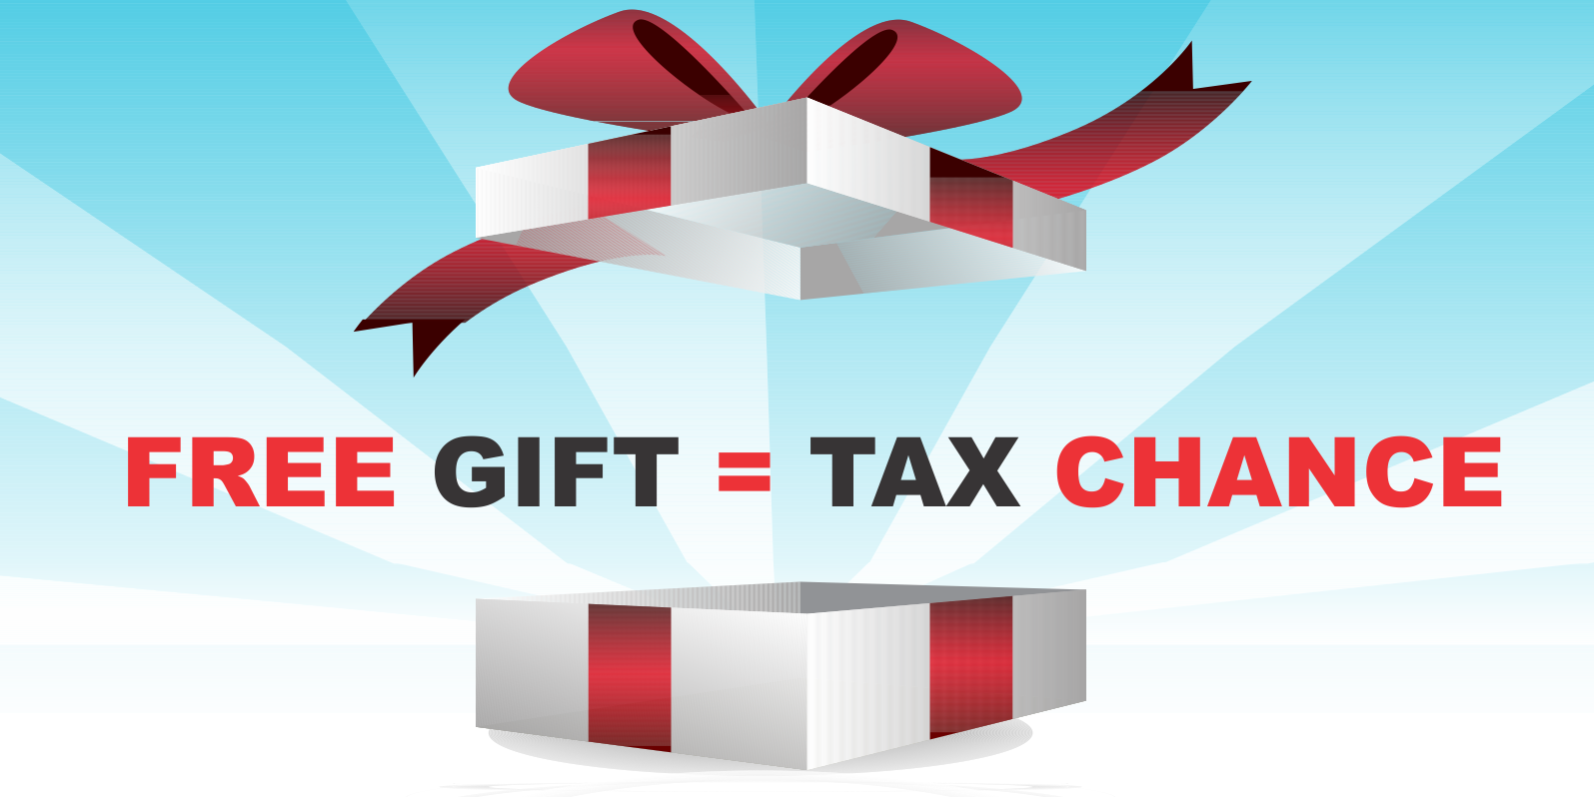 Is A Free Gift Worth Taking a Tax Chance?